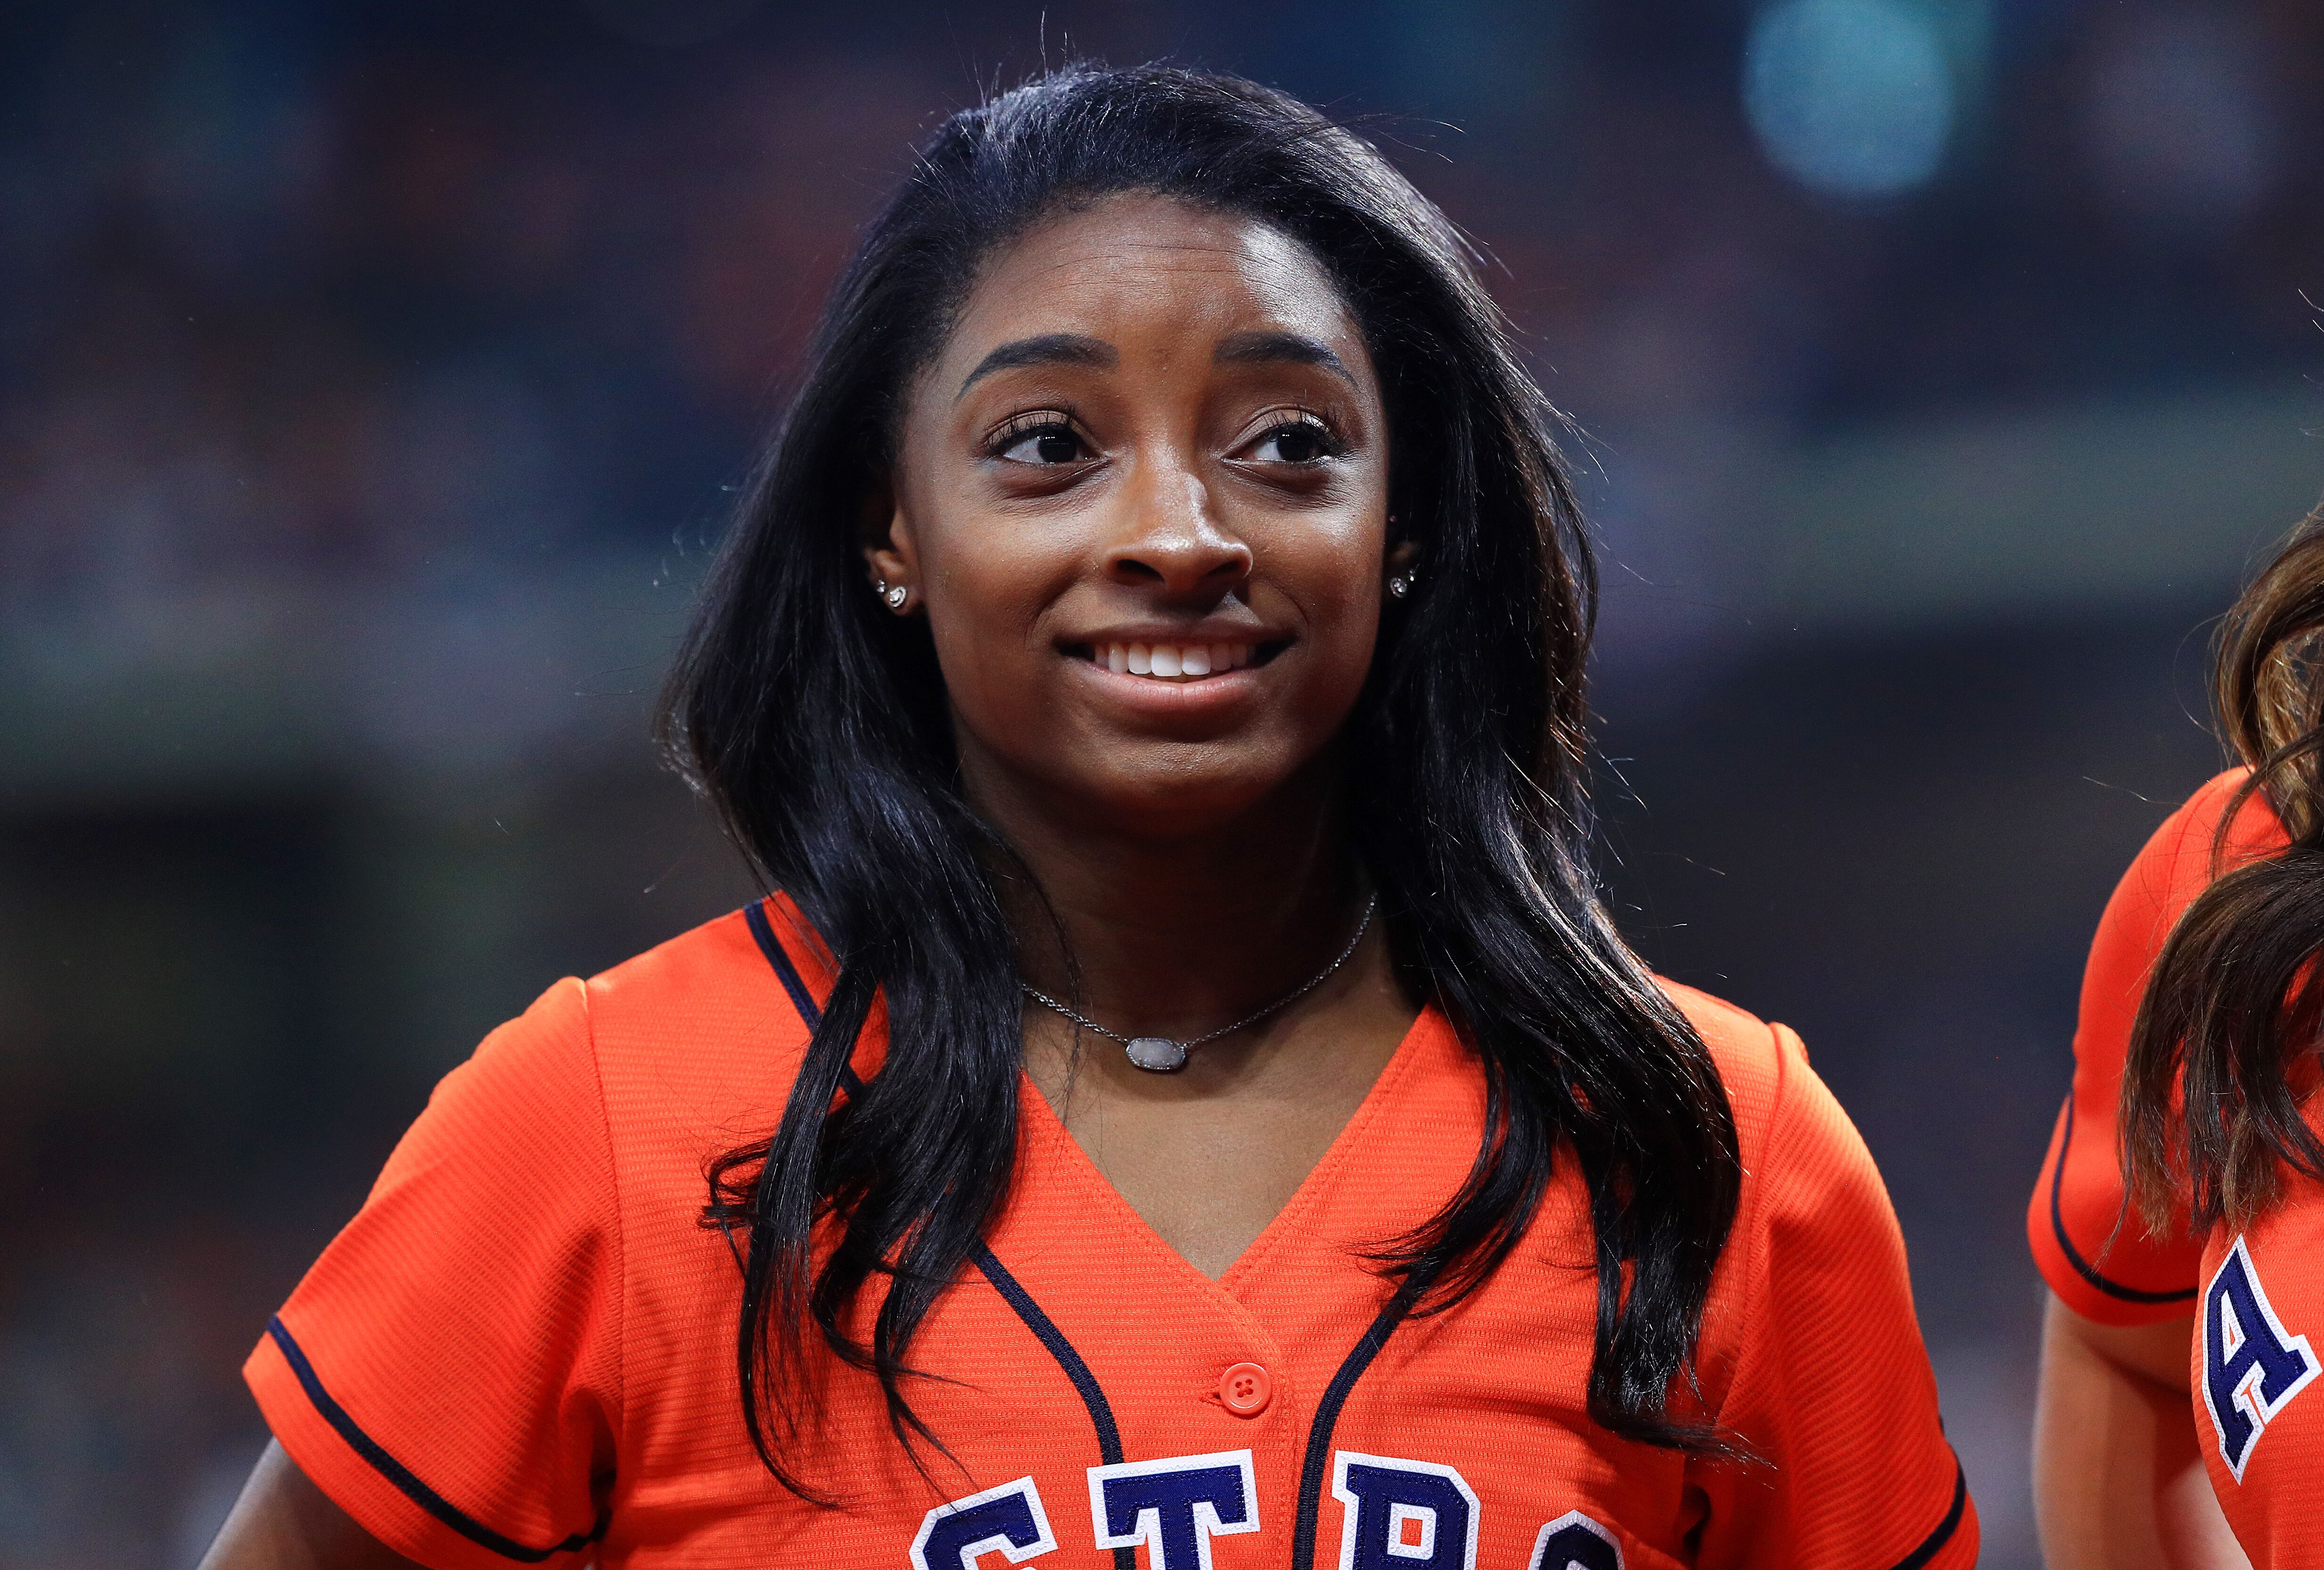 Simone Biles at Game 2 of the 2019 World Series between the Houston Astros and the Washington Nationals on October 23, 2019. | Source: Getty Images